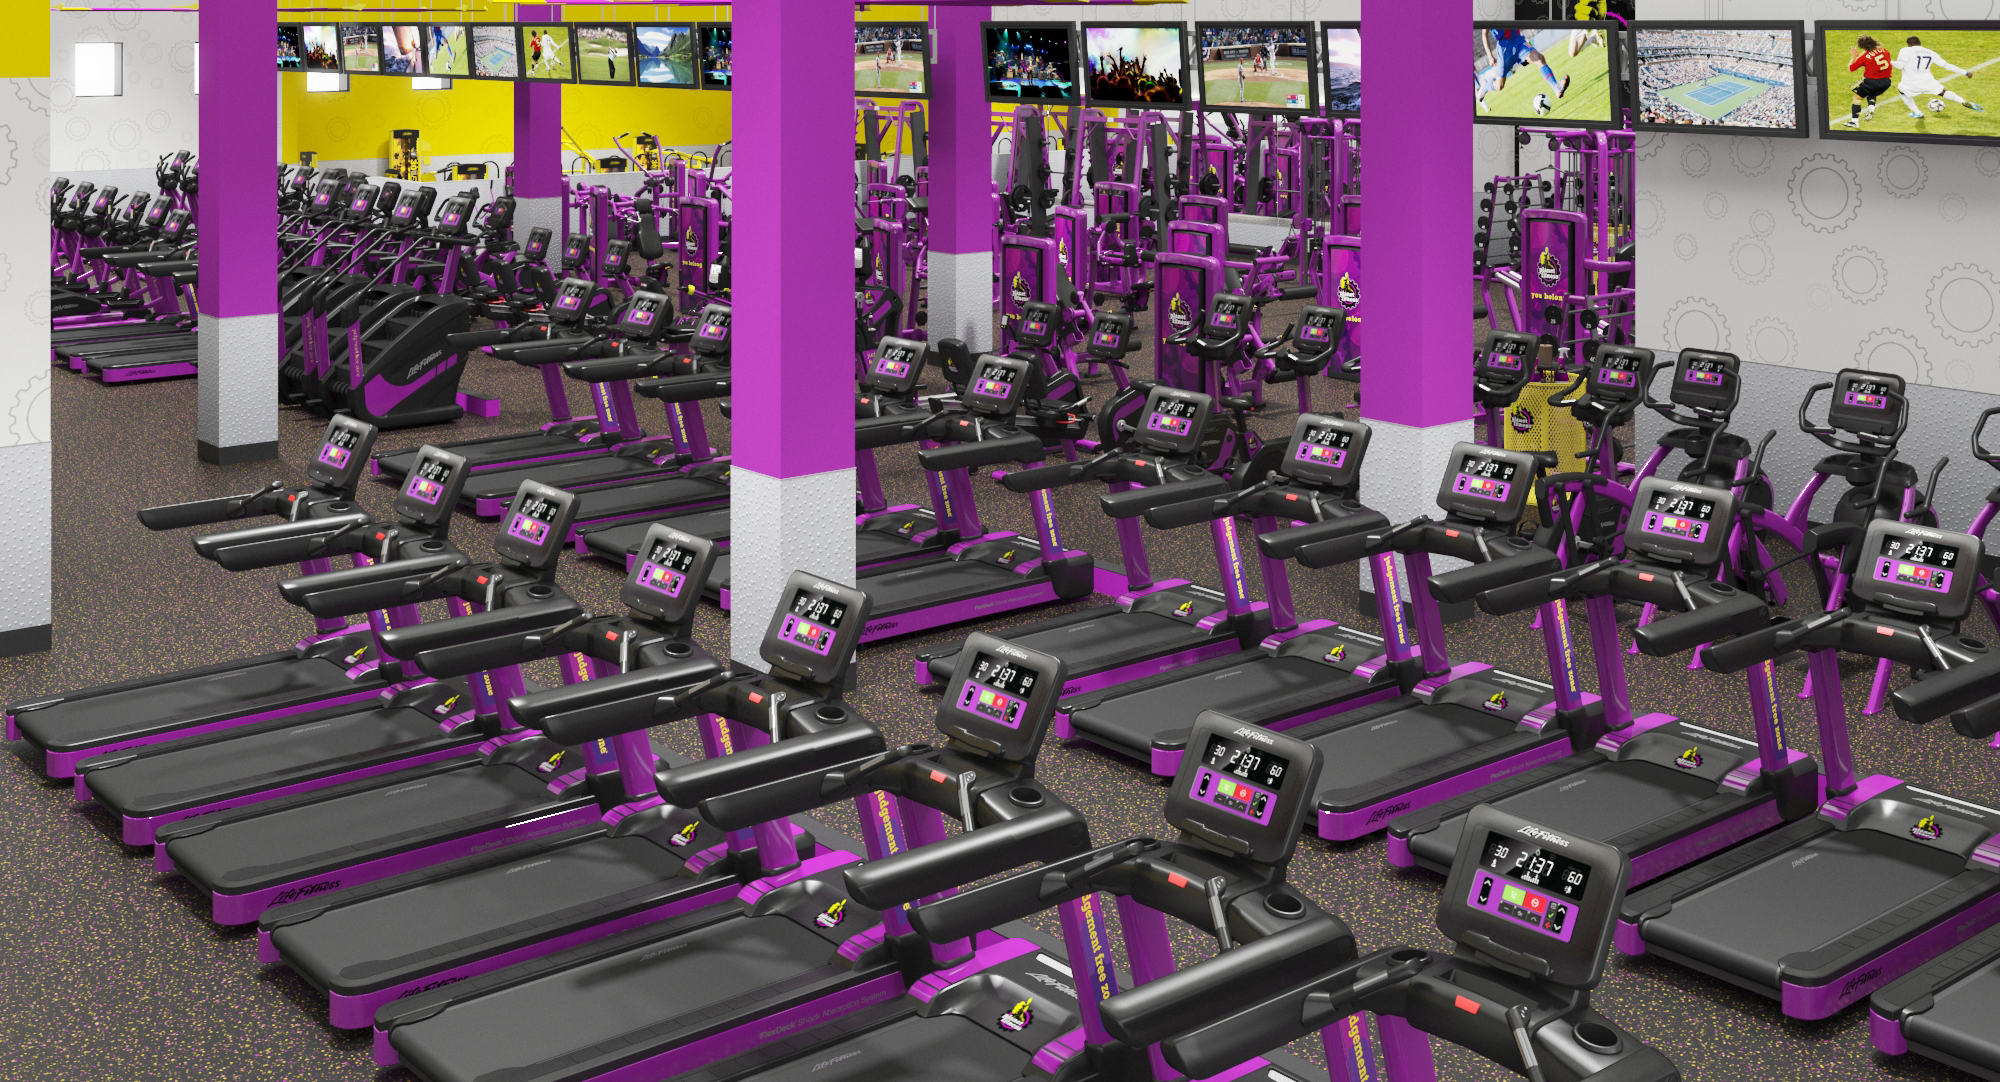 Planet fitness be free - Gem